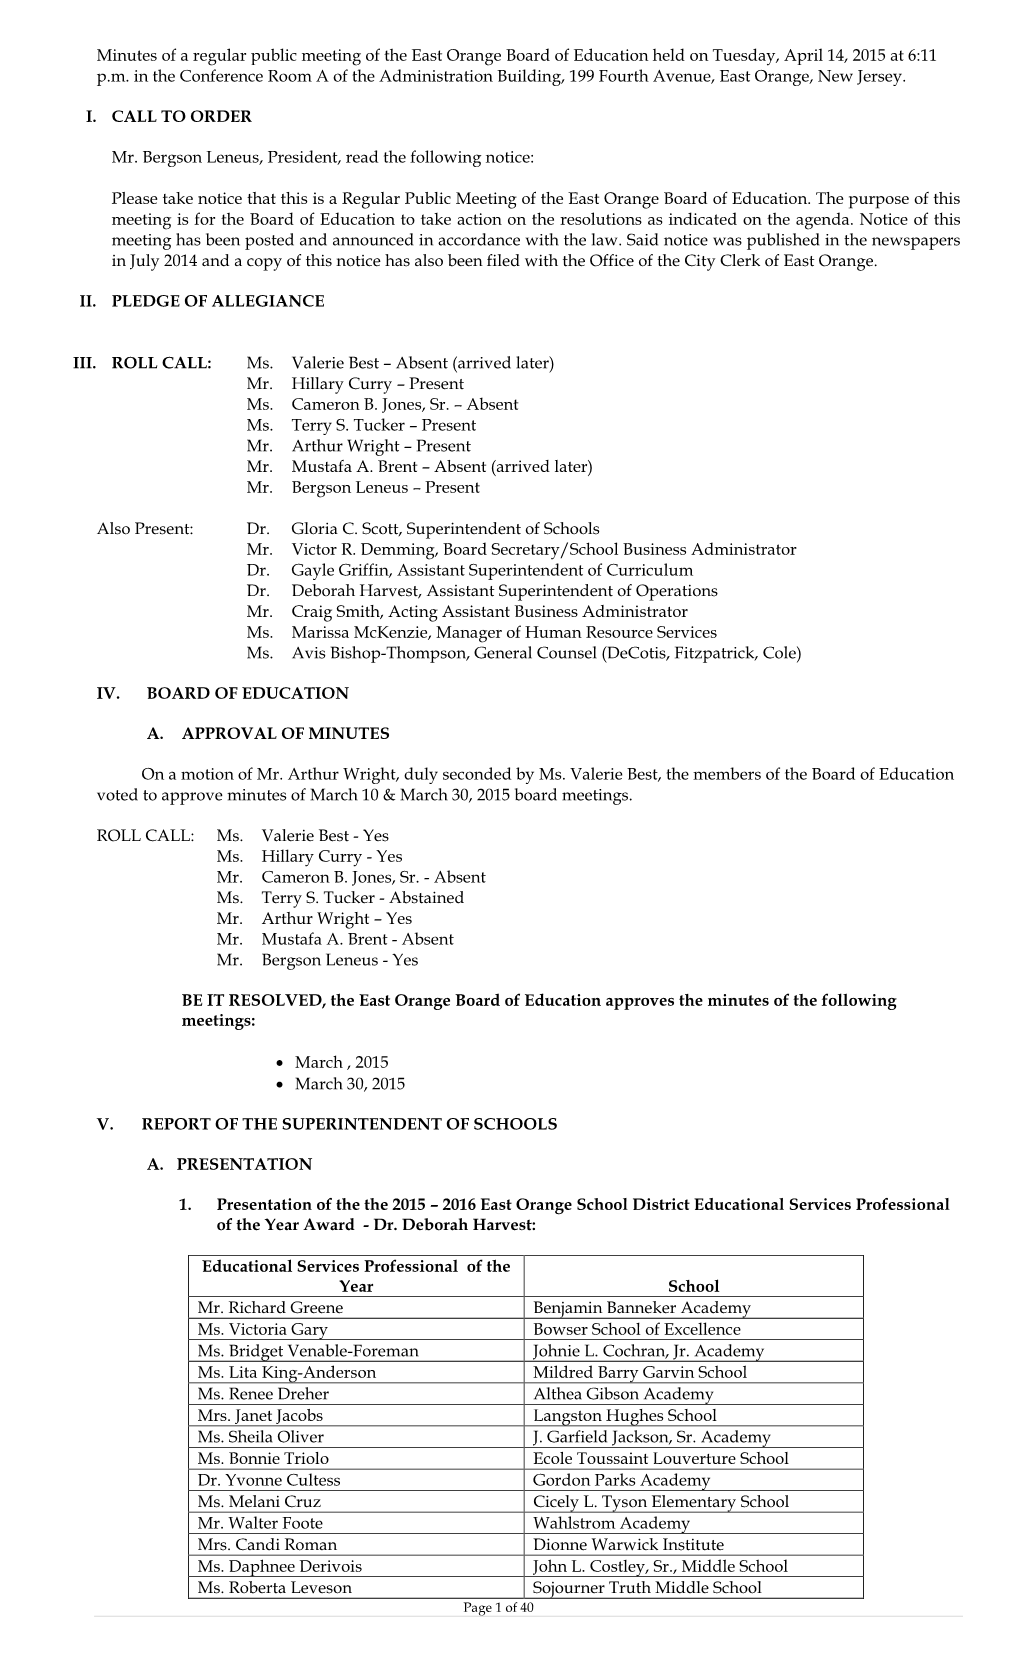 Minutes of a Regular Public Meeting of the East Orange Board of Education Held on Tuesday, April 14, 2015 at 6:11 P.M. in the Co